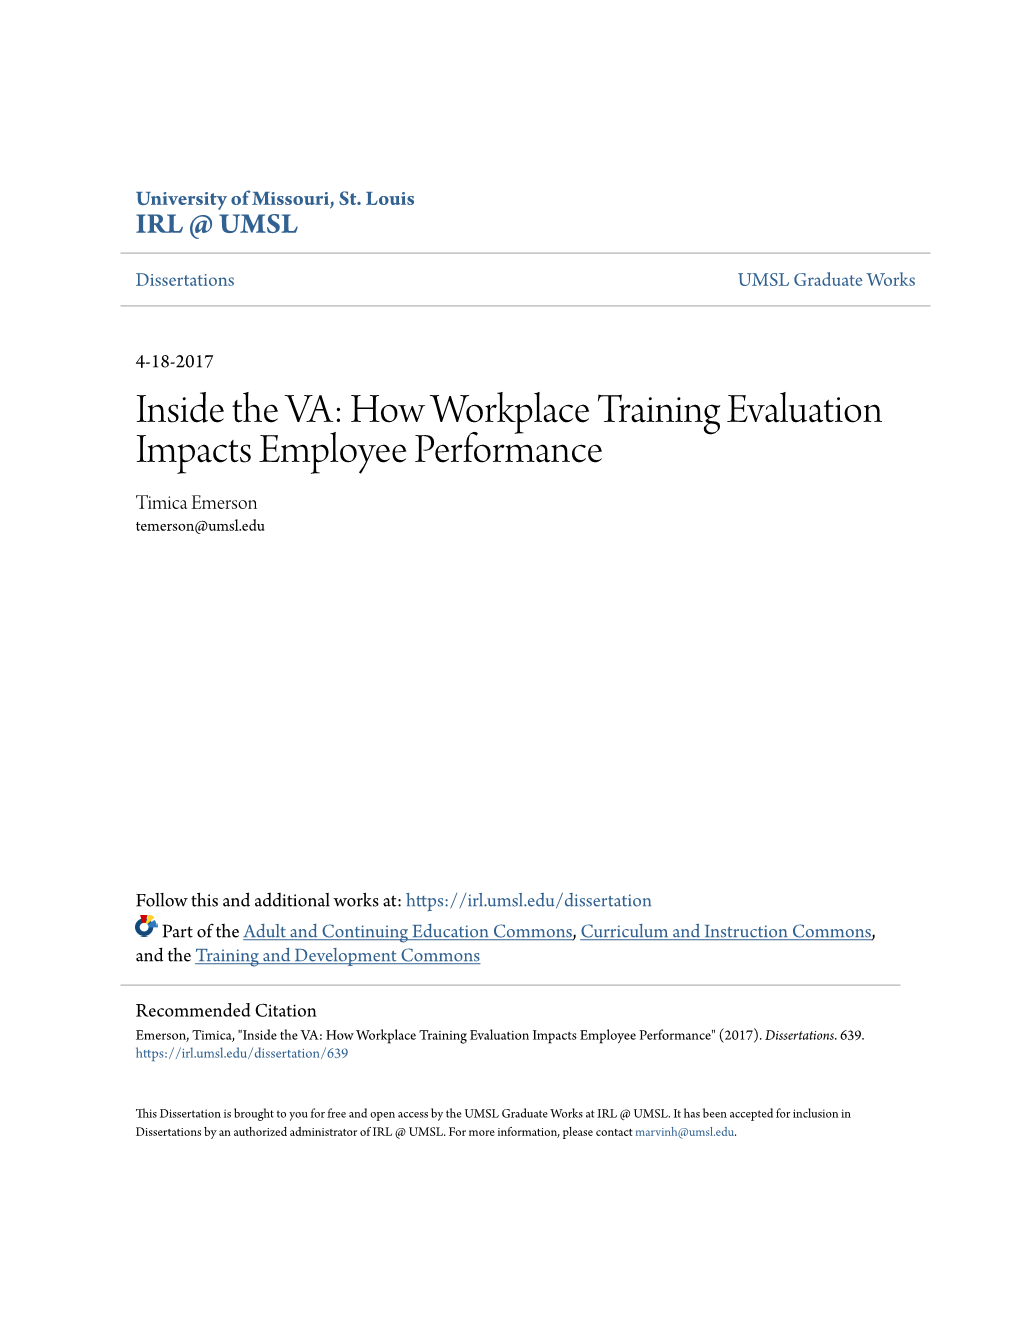 How Workplace Training Evaluation Impacts Employee Performance Timica Emerson Temerson@Umsl.Edu